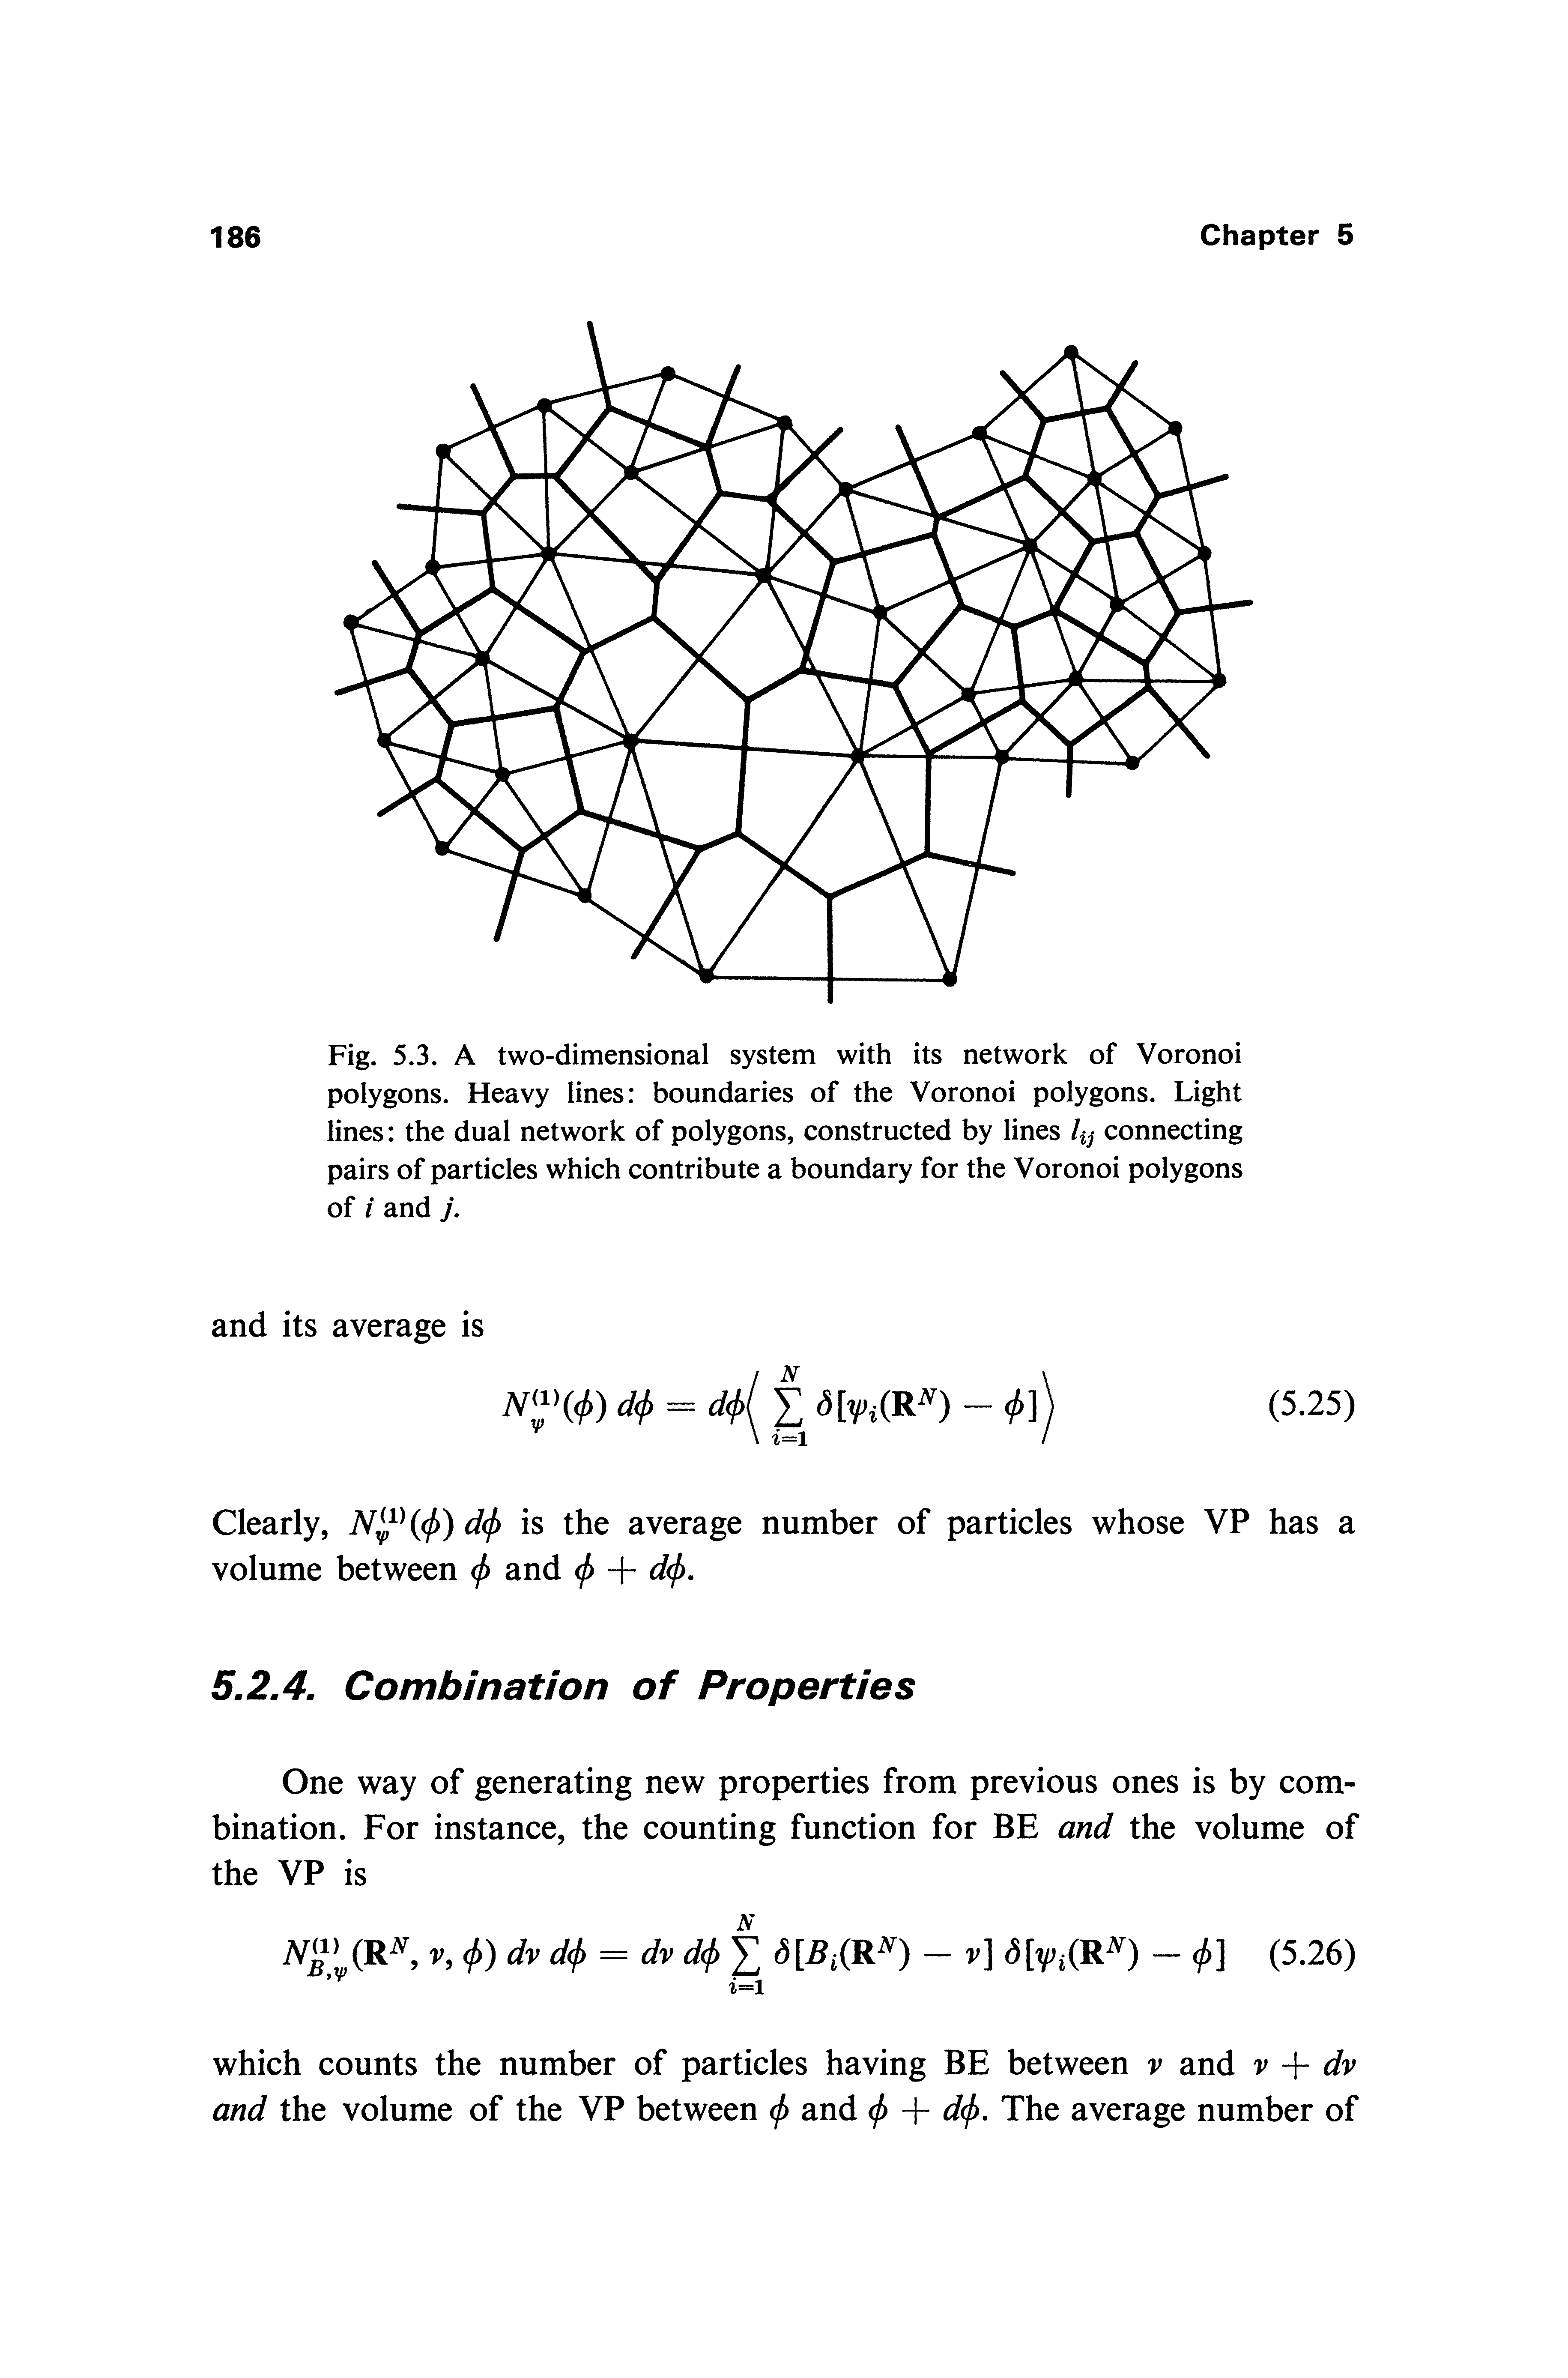 Fig. 5.3. A two-dimensional system with its network of Voronoi polygons. Heavy lines boundaries of the Voronoi polygons. Light lines the dual network of polygons, constructed by lines kj connecting pairs of particles which contribute a boundary for the Voronoi polygons of i and j.